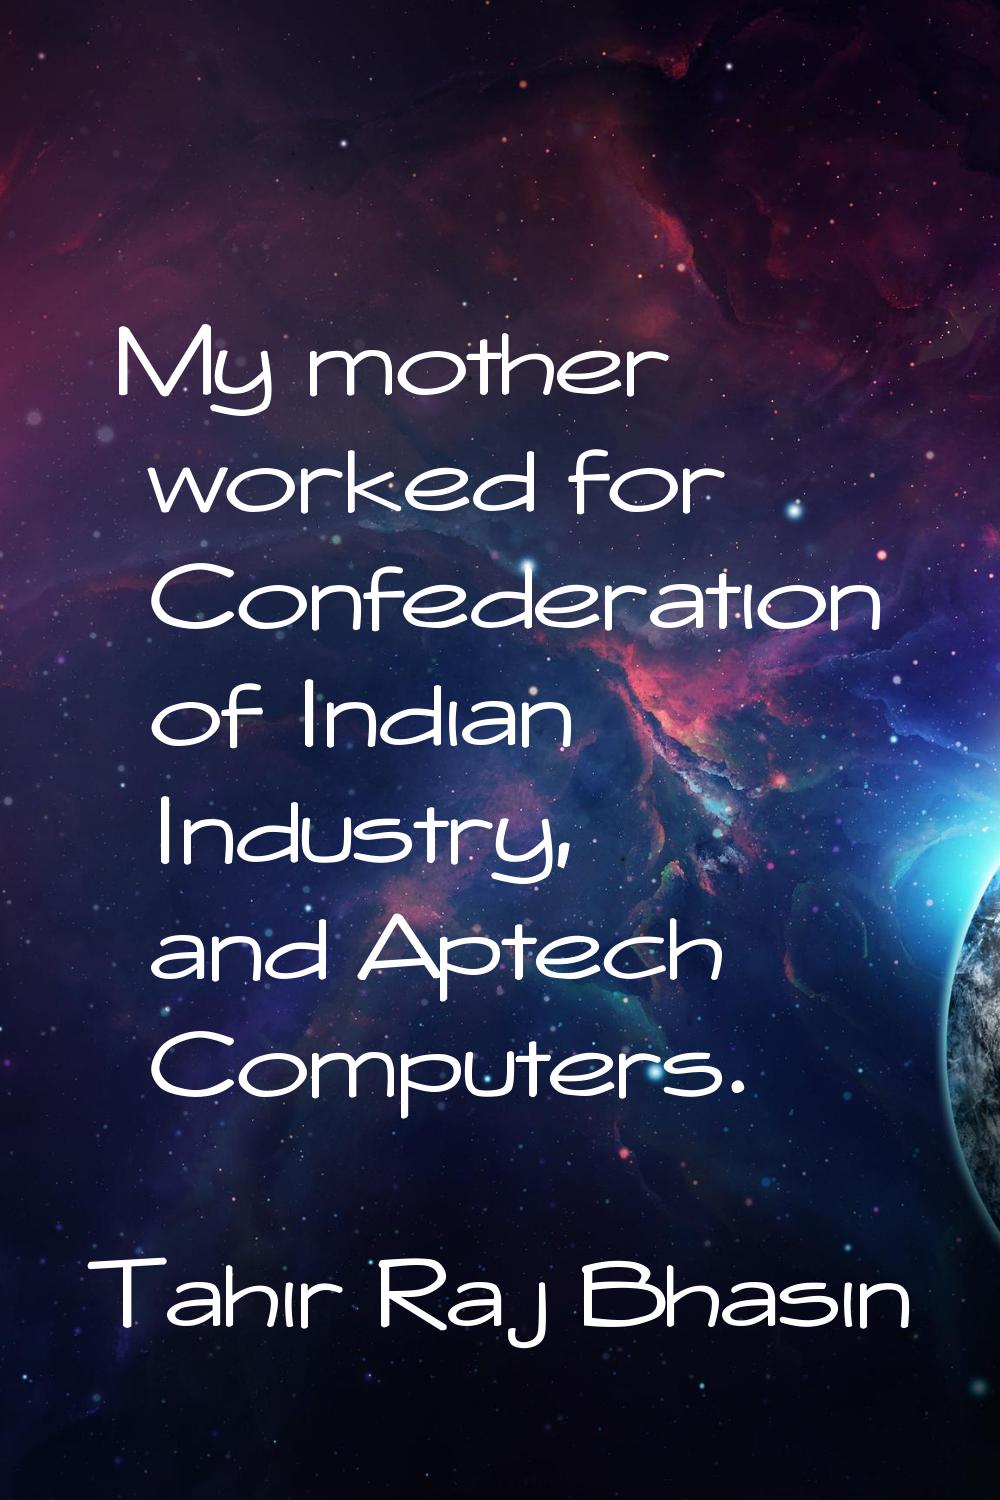 My mother worked for Confederation of Indian Industry, and Aptech Computers.